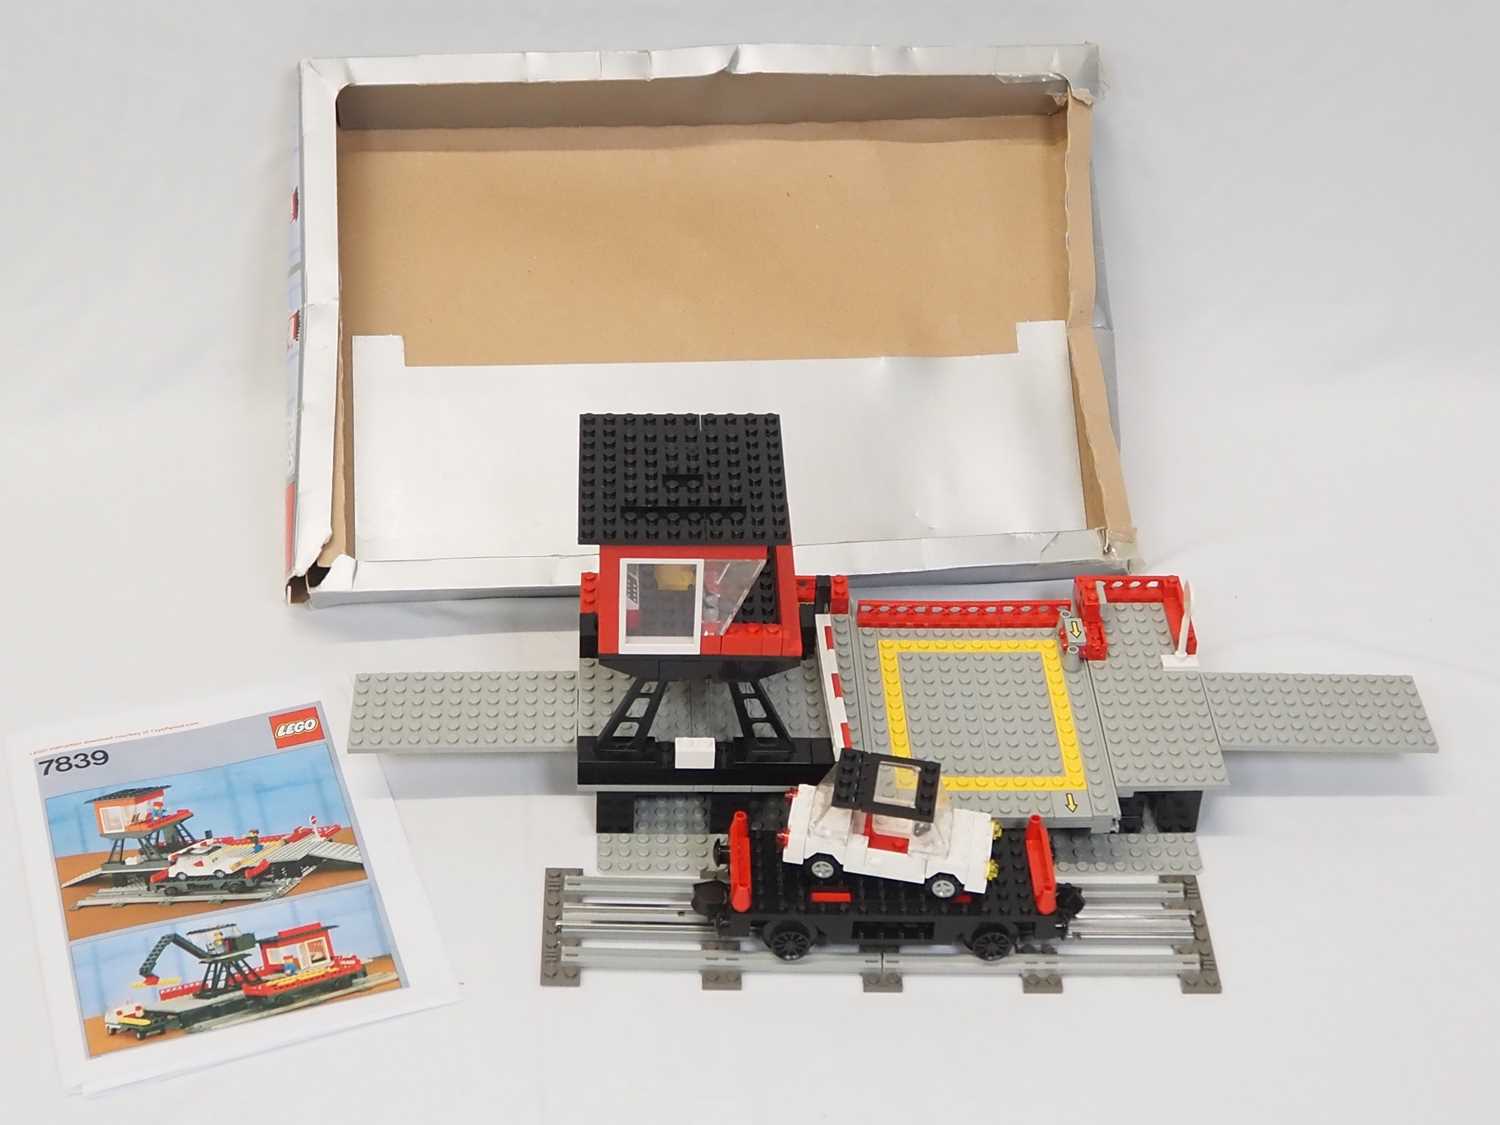 LEGO - TRAIN #7839 - 12v Car Transport Depot - Some parts with internal box, printed instructions no